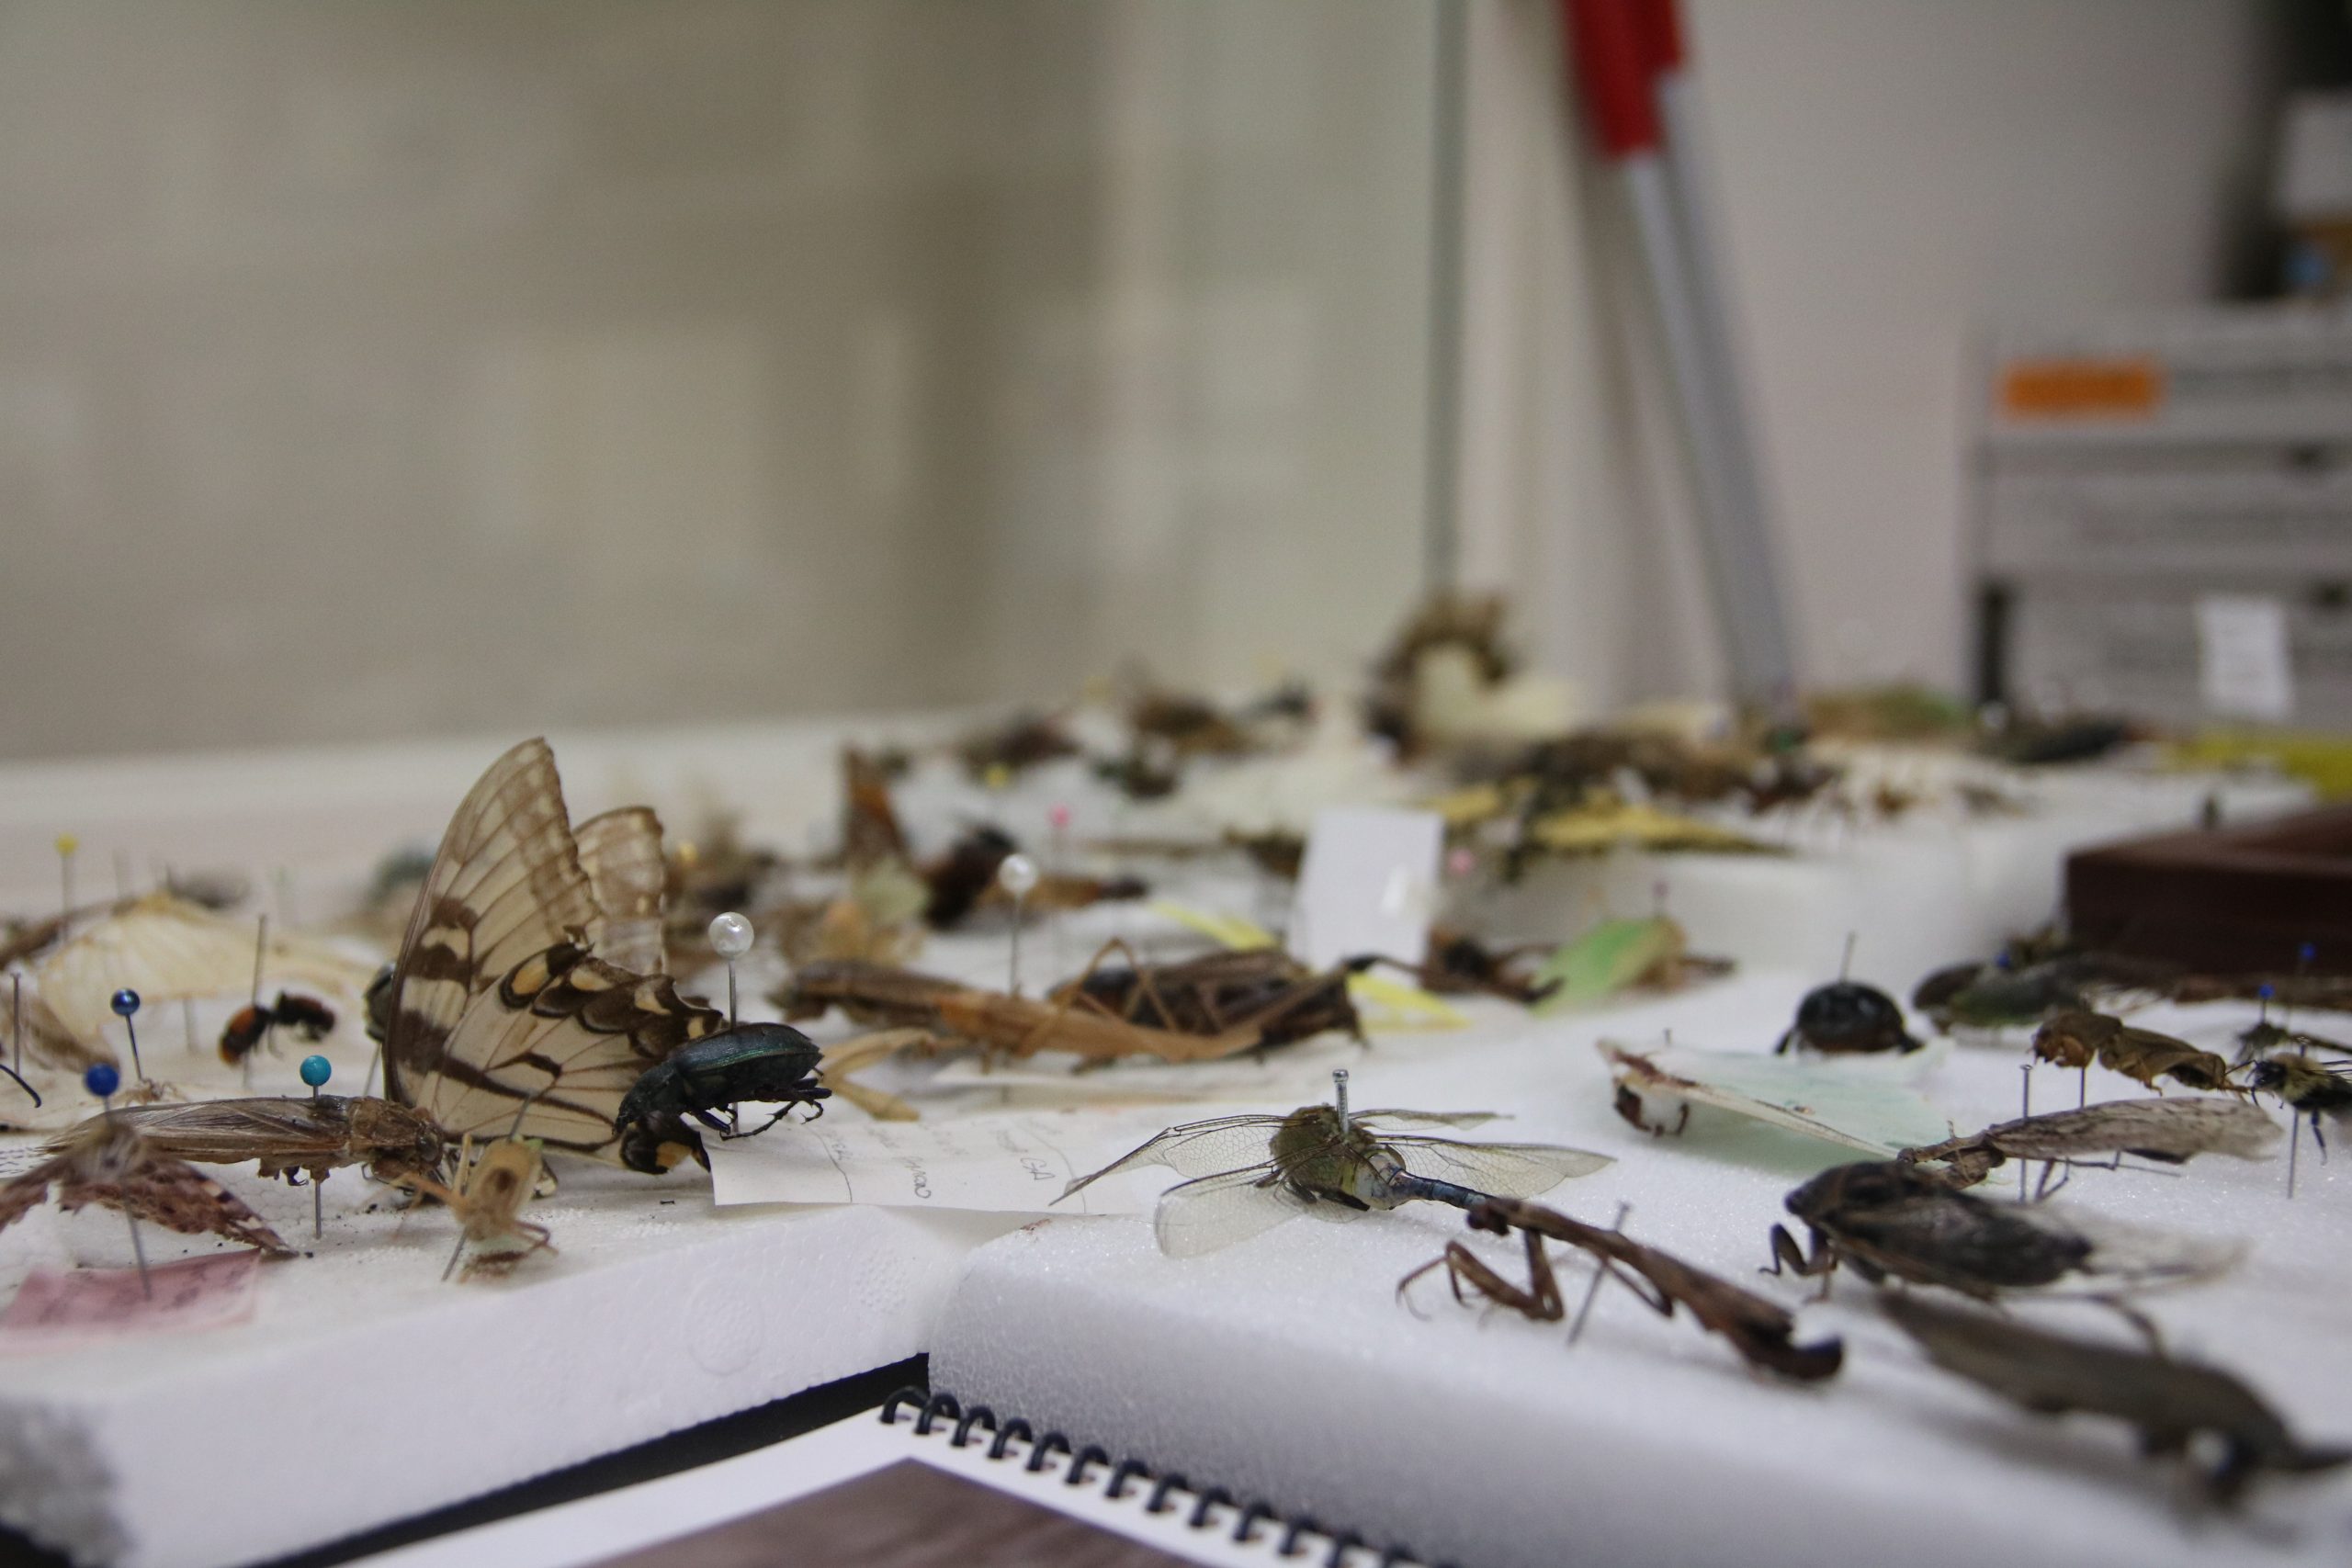 A Look Inside Georgia’s Only Forensic Entomology Lab